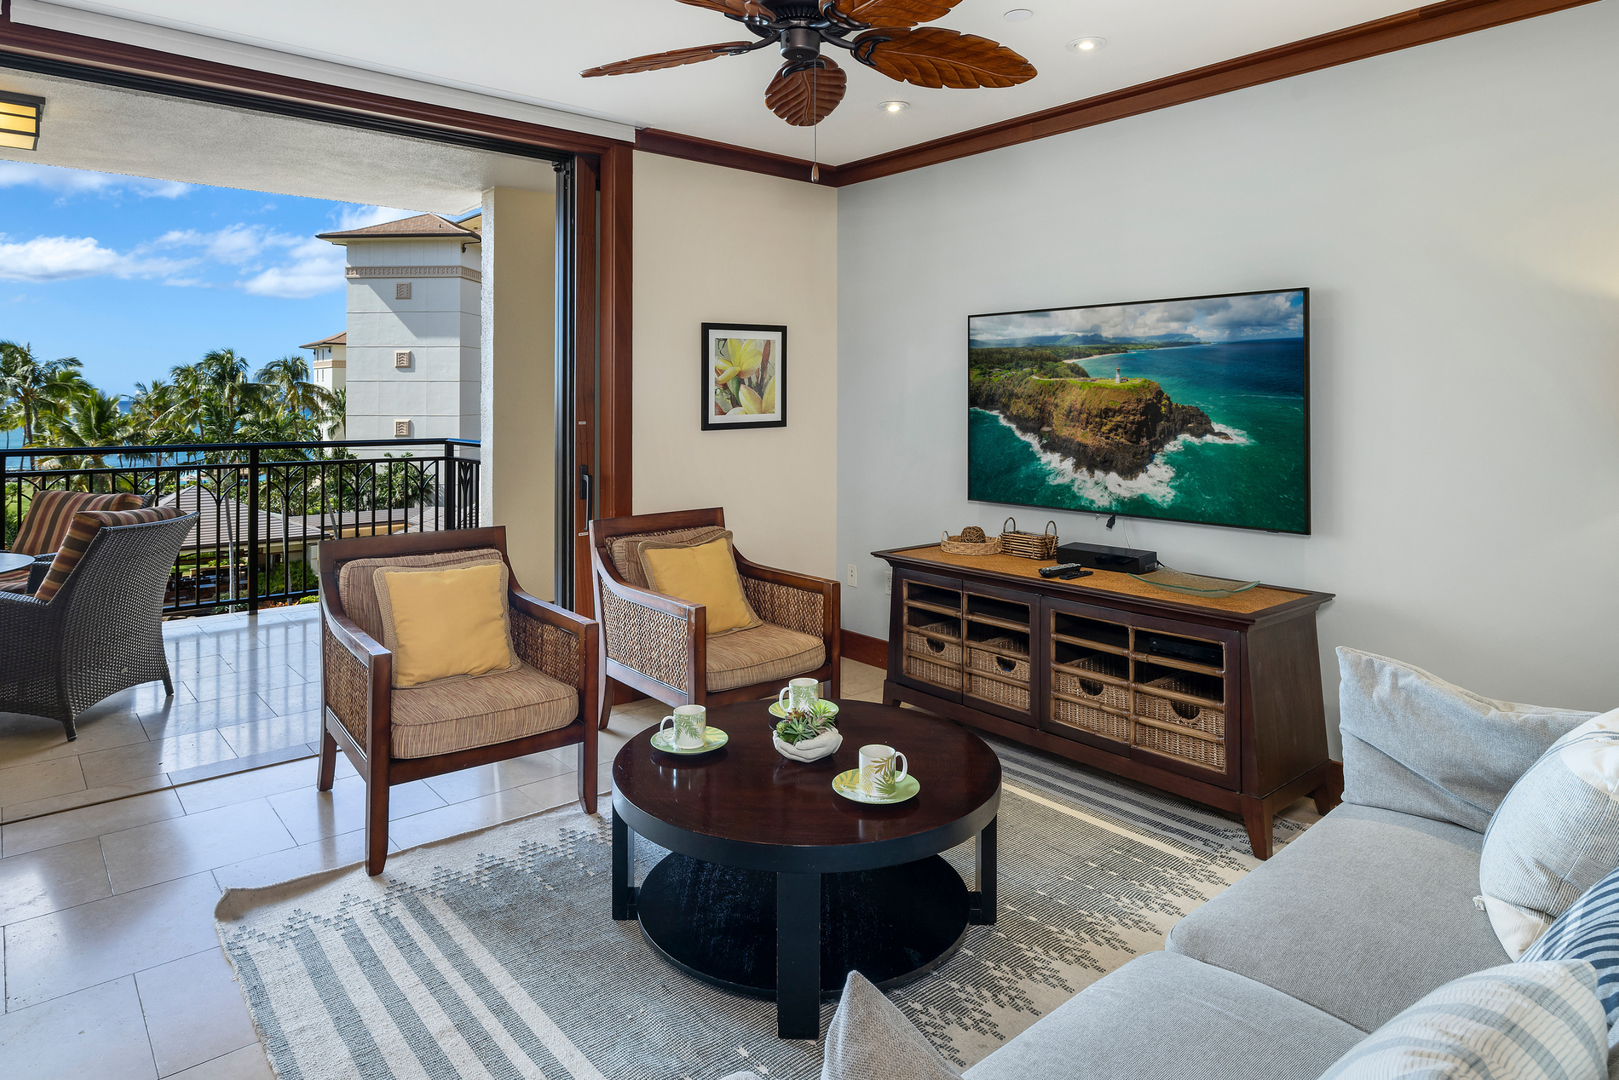 Kapolei Vacation Rentals, Ko Olina Beach Villas O505 - The perfect spot for a movie or favorite show at the end of your day.